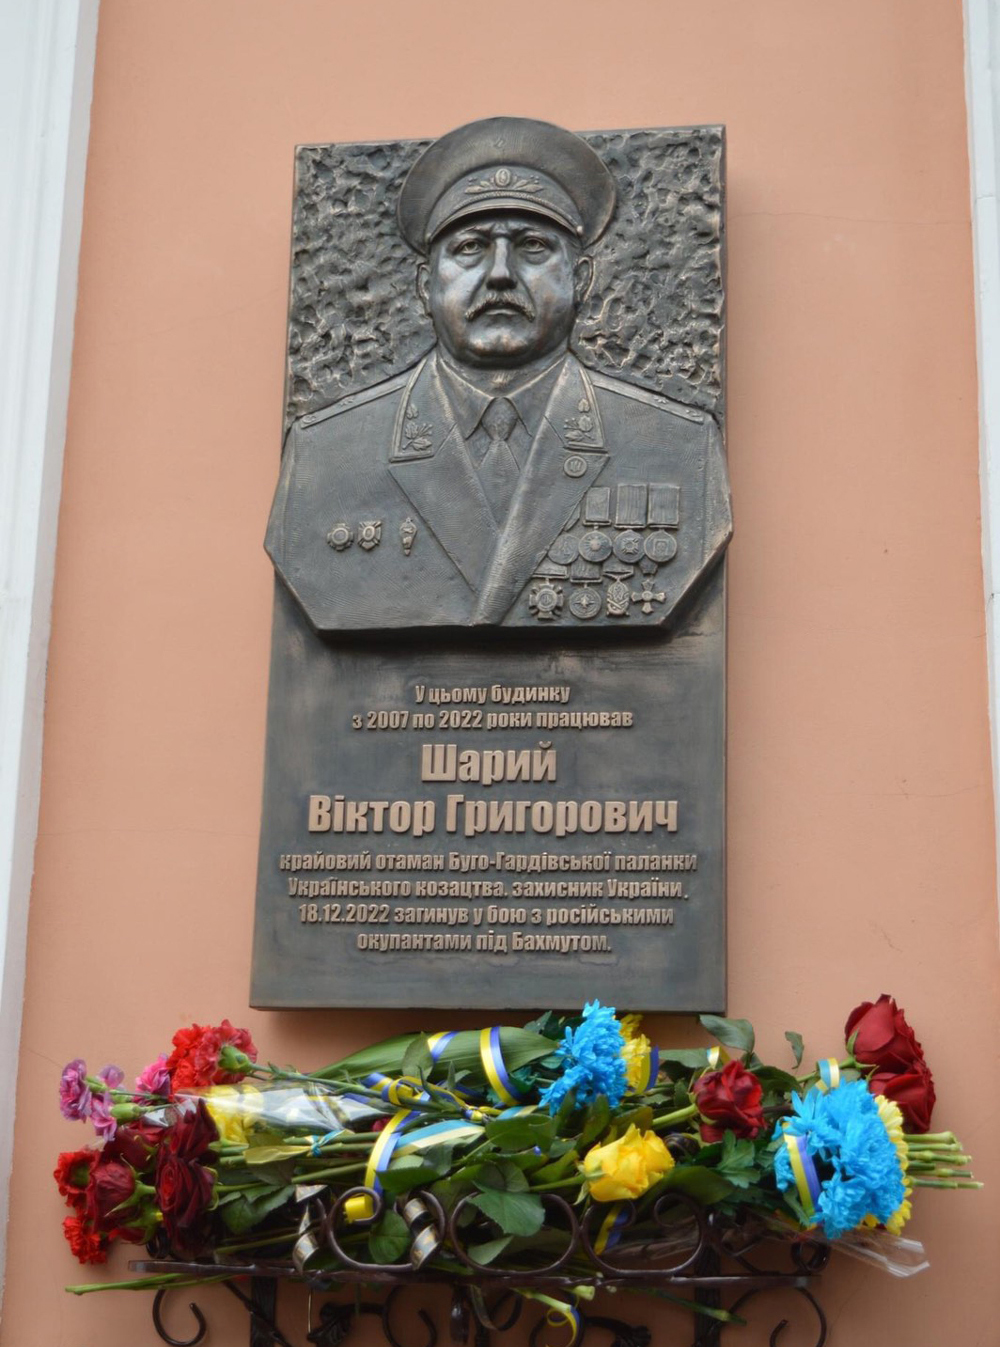 On December 17, a memorial plaque for the Hero was unveiled in Kropyvnytskyi: Victor Shariy.